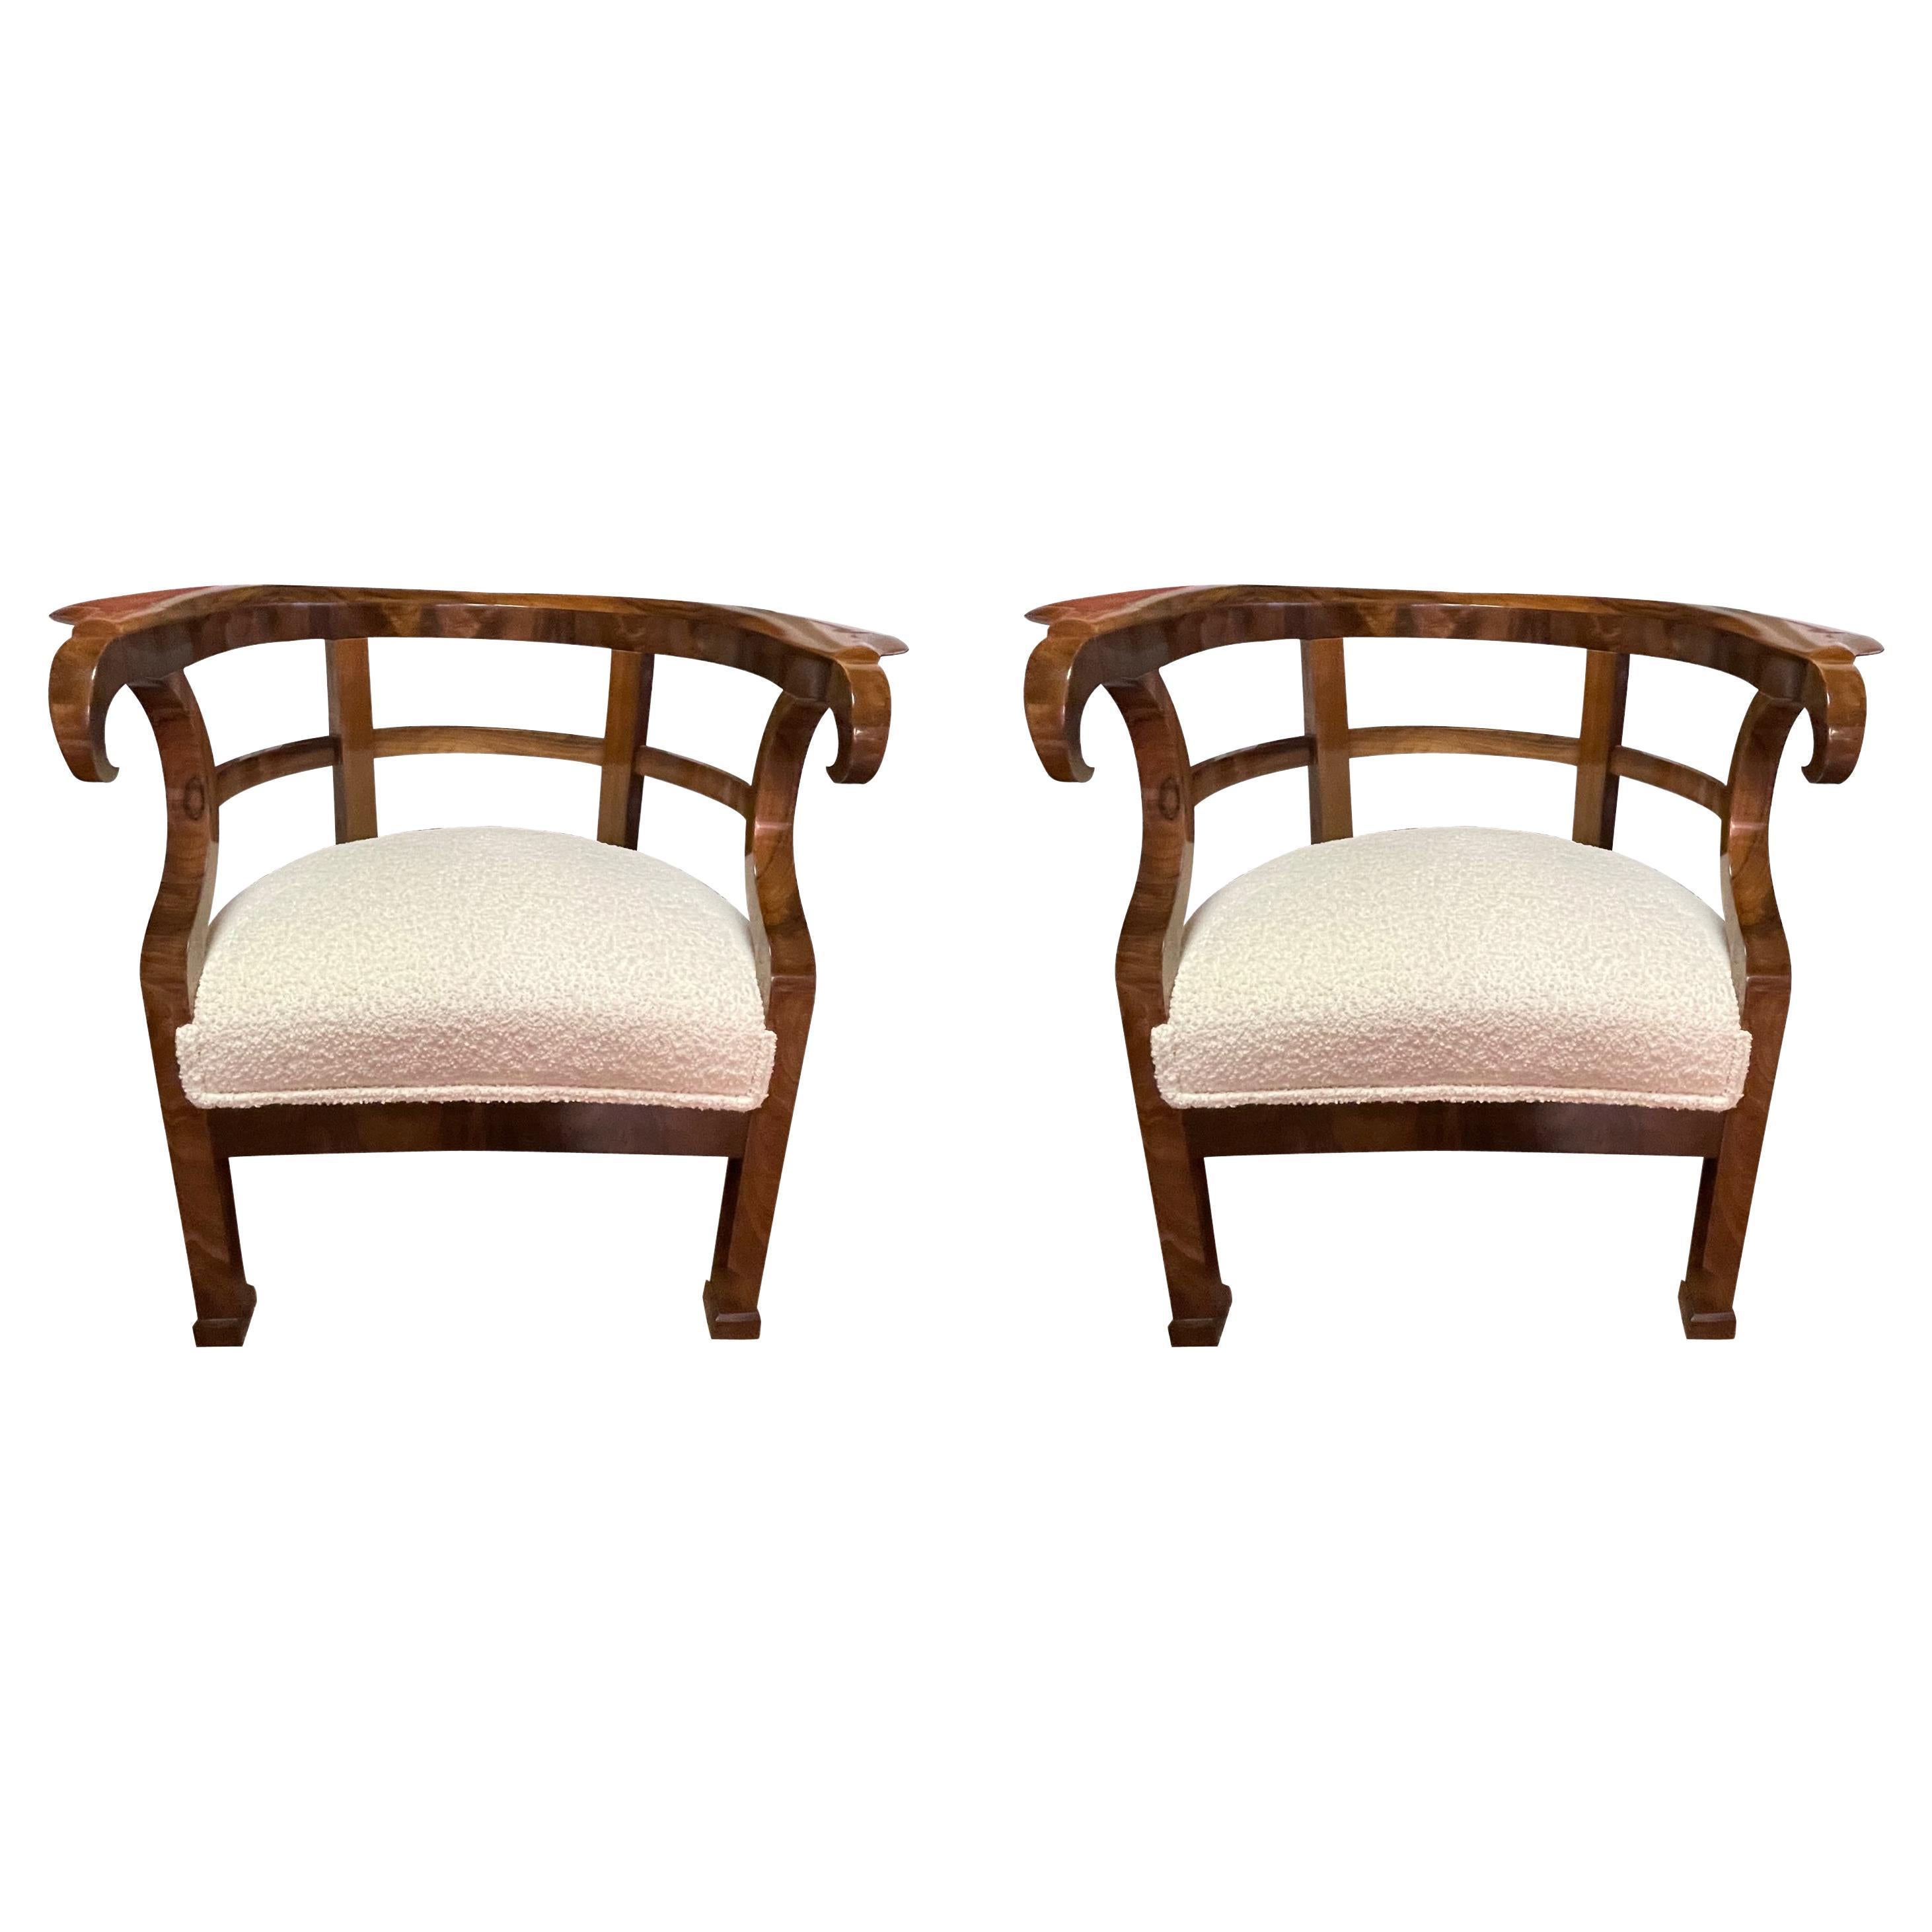 High Polish Mahogany Curved Back, Upholstered Seat Side Chairs, Italian, 1930s